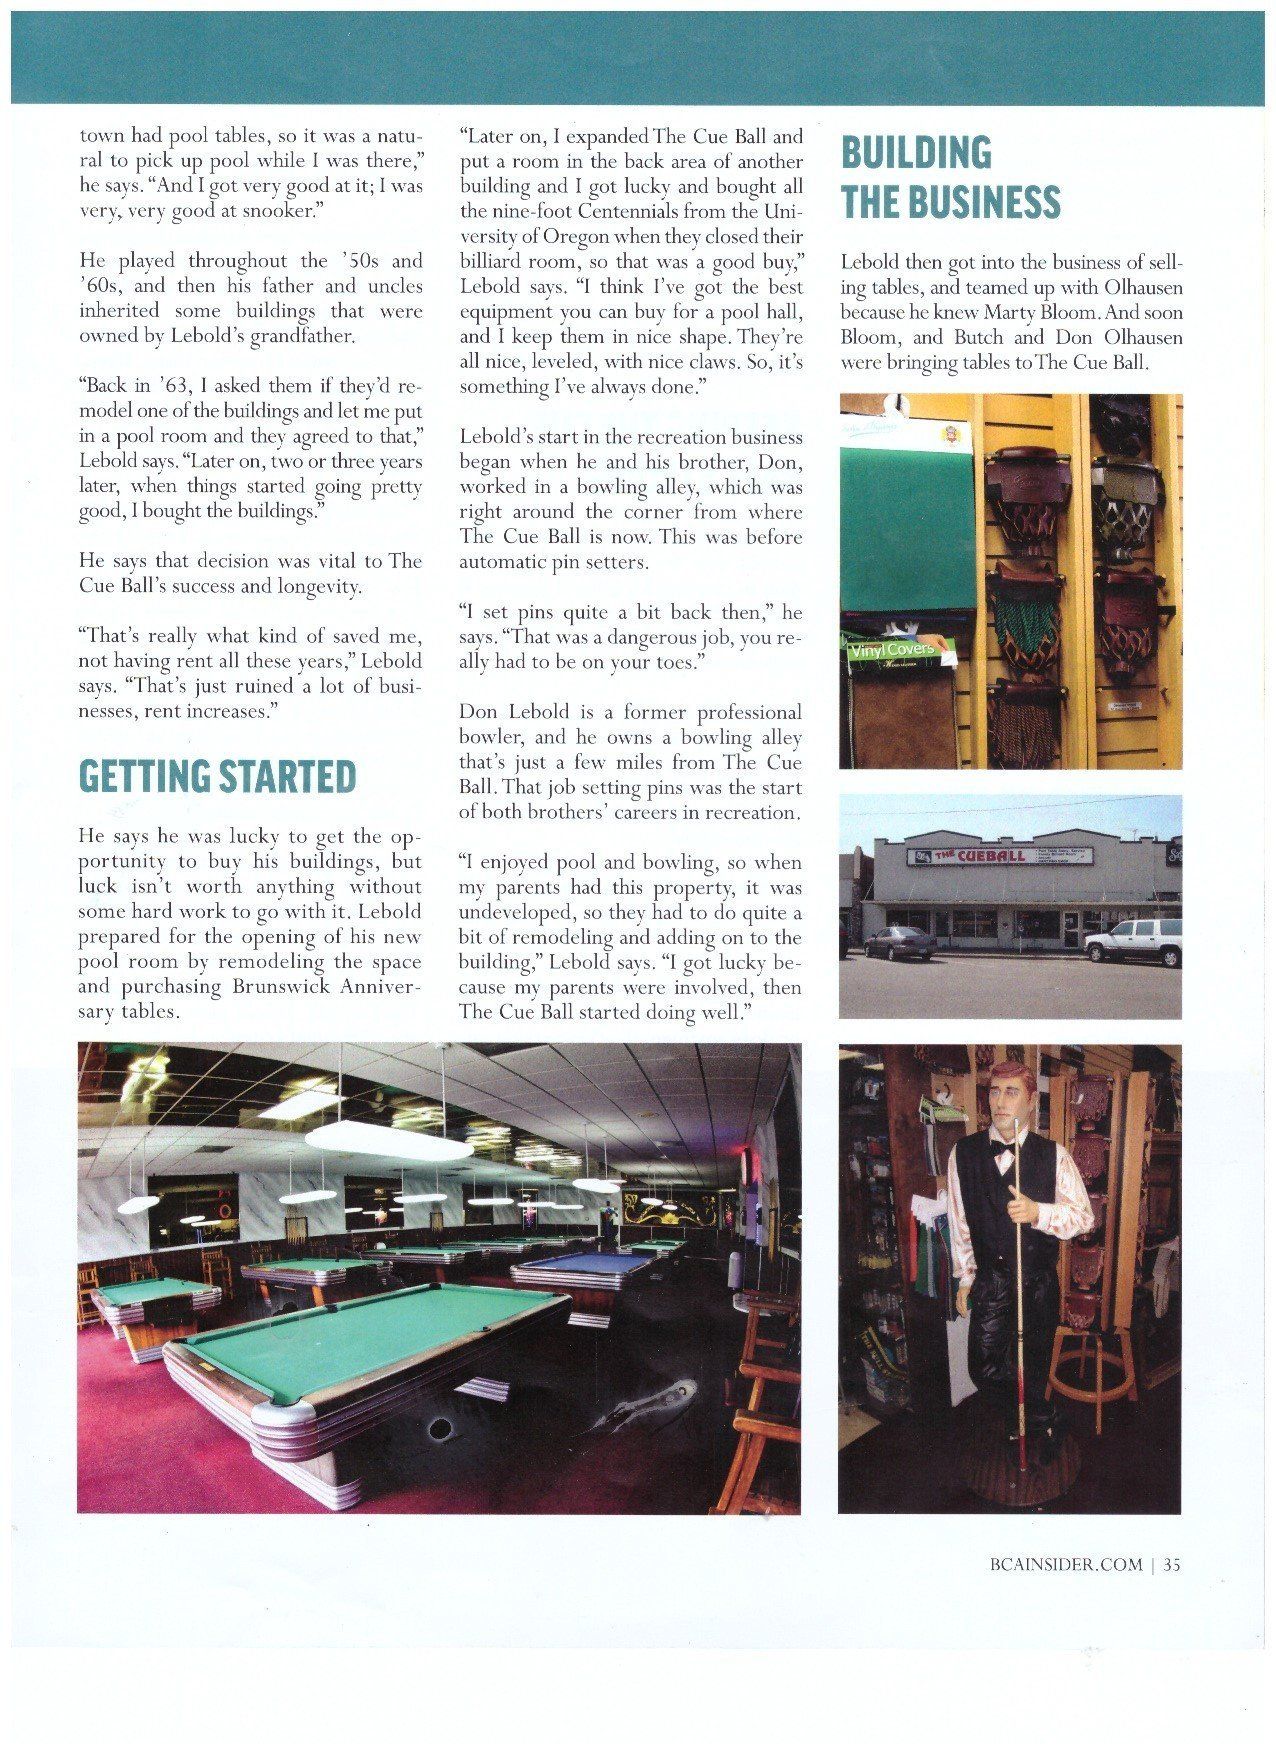 BCA Magazine Page 2 — Salem, OR — The Cue Ball